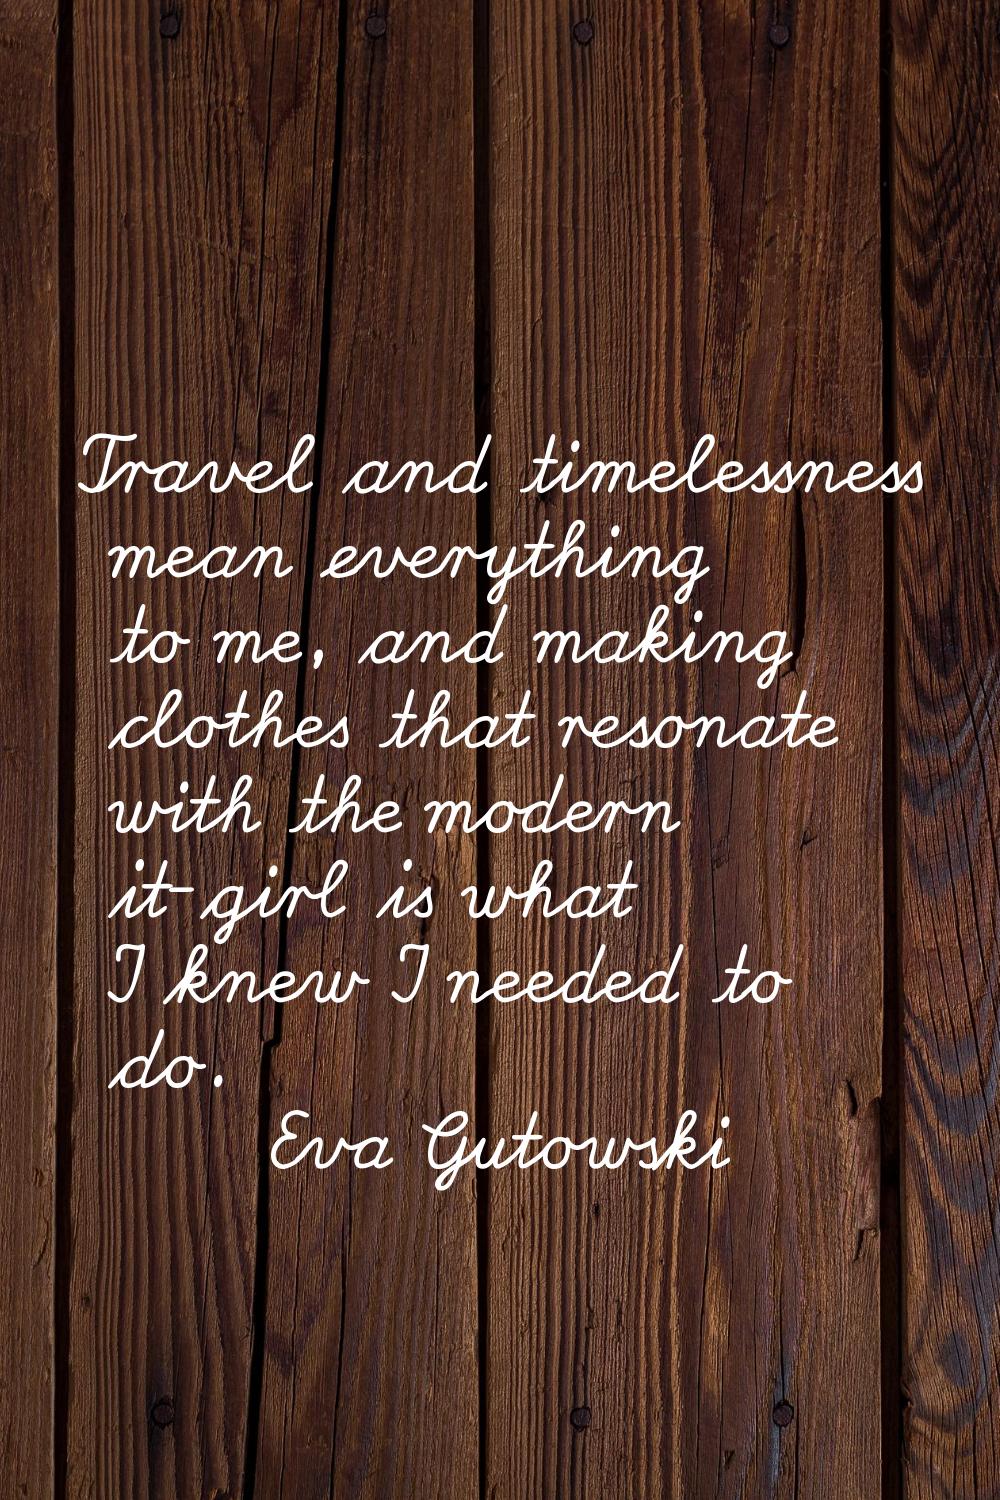 Travel and timelessness mean everything to me, and making clothes that resonate with the modern it-